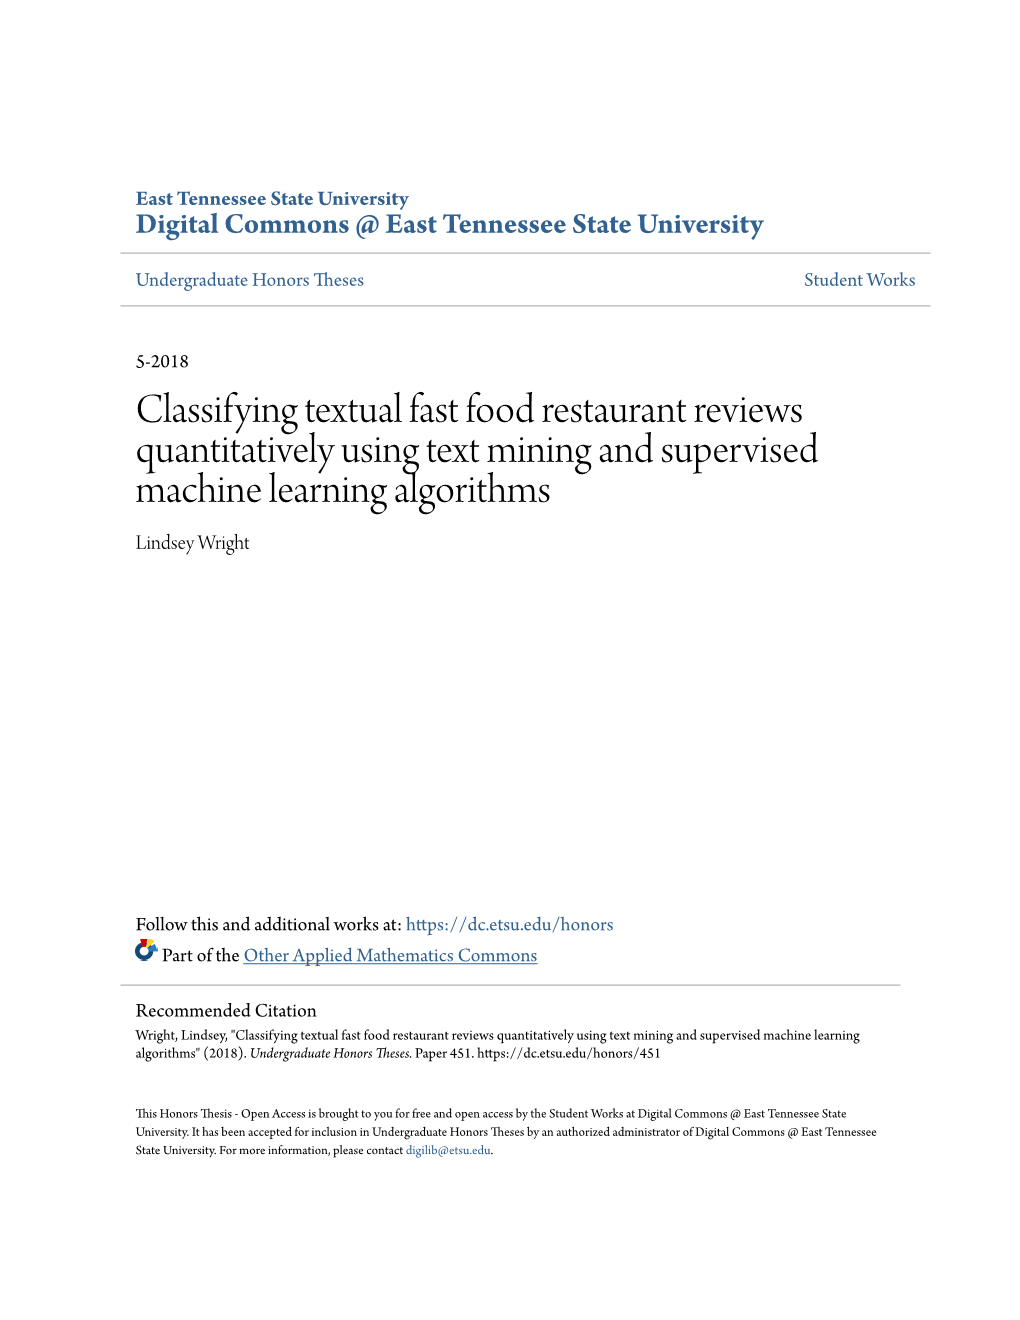 Classifying Textual Fast Food Restaurant Reviews Quantitatively Using Text Mining and Supervised Machine Learning Algorithms Lindsey Wright